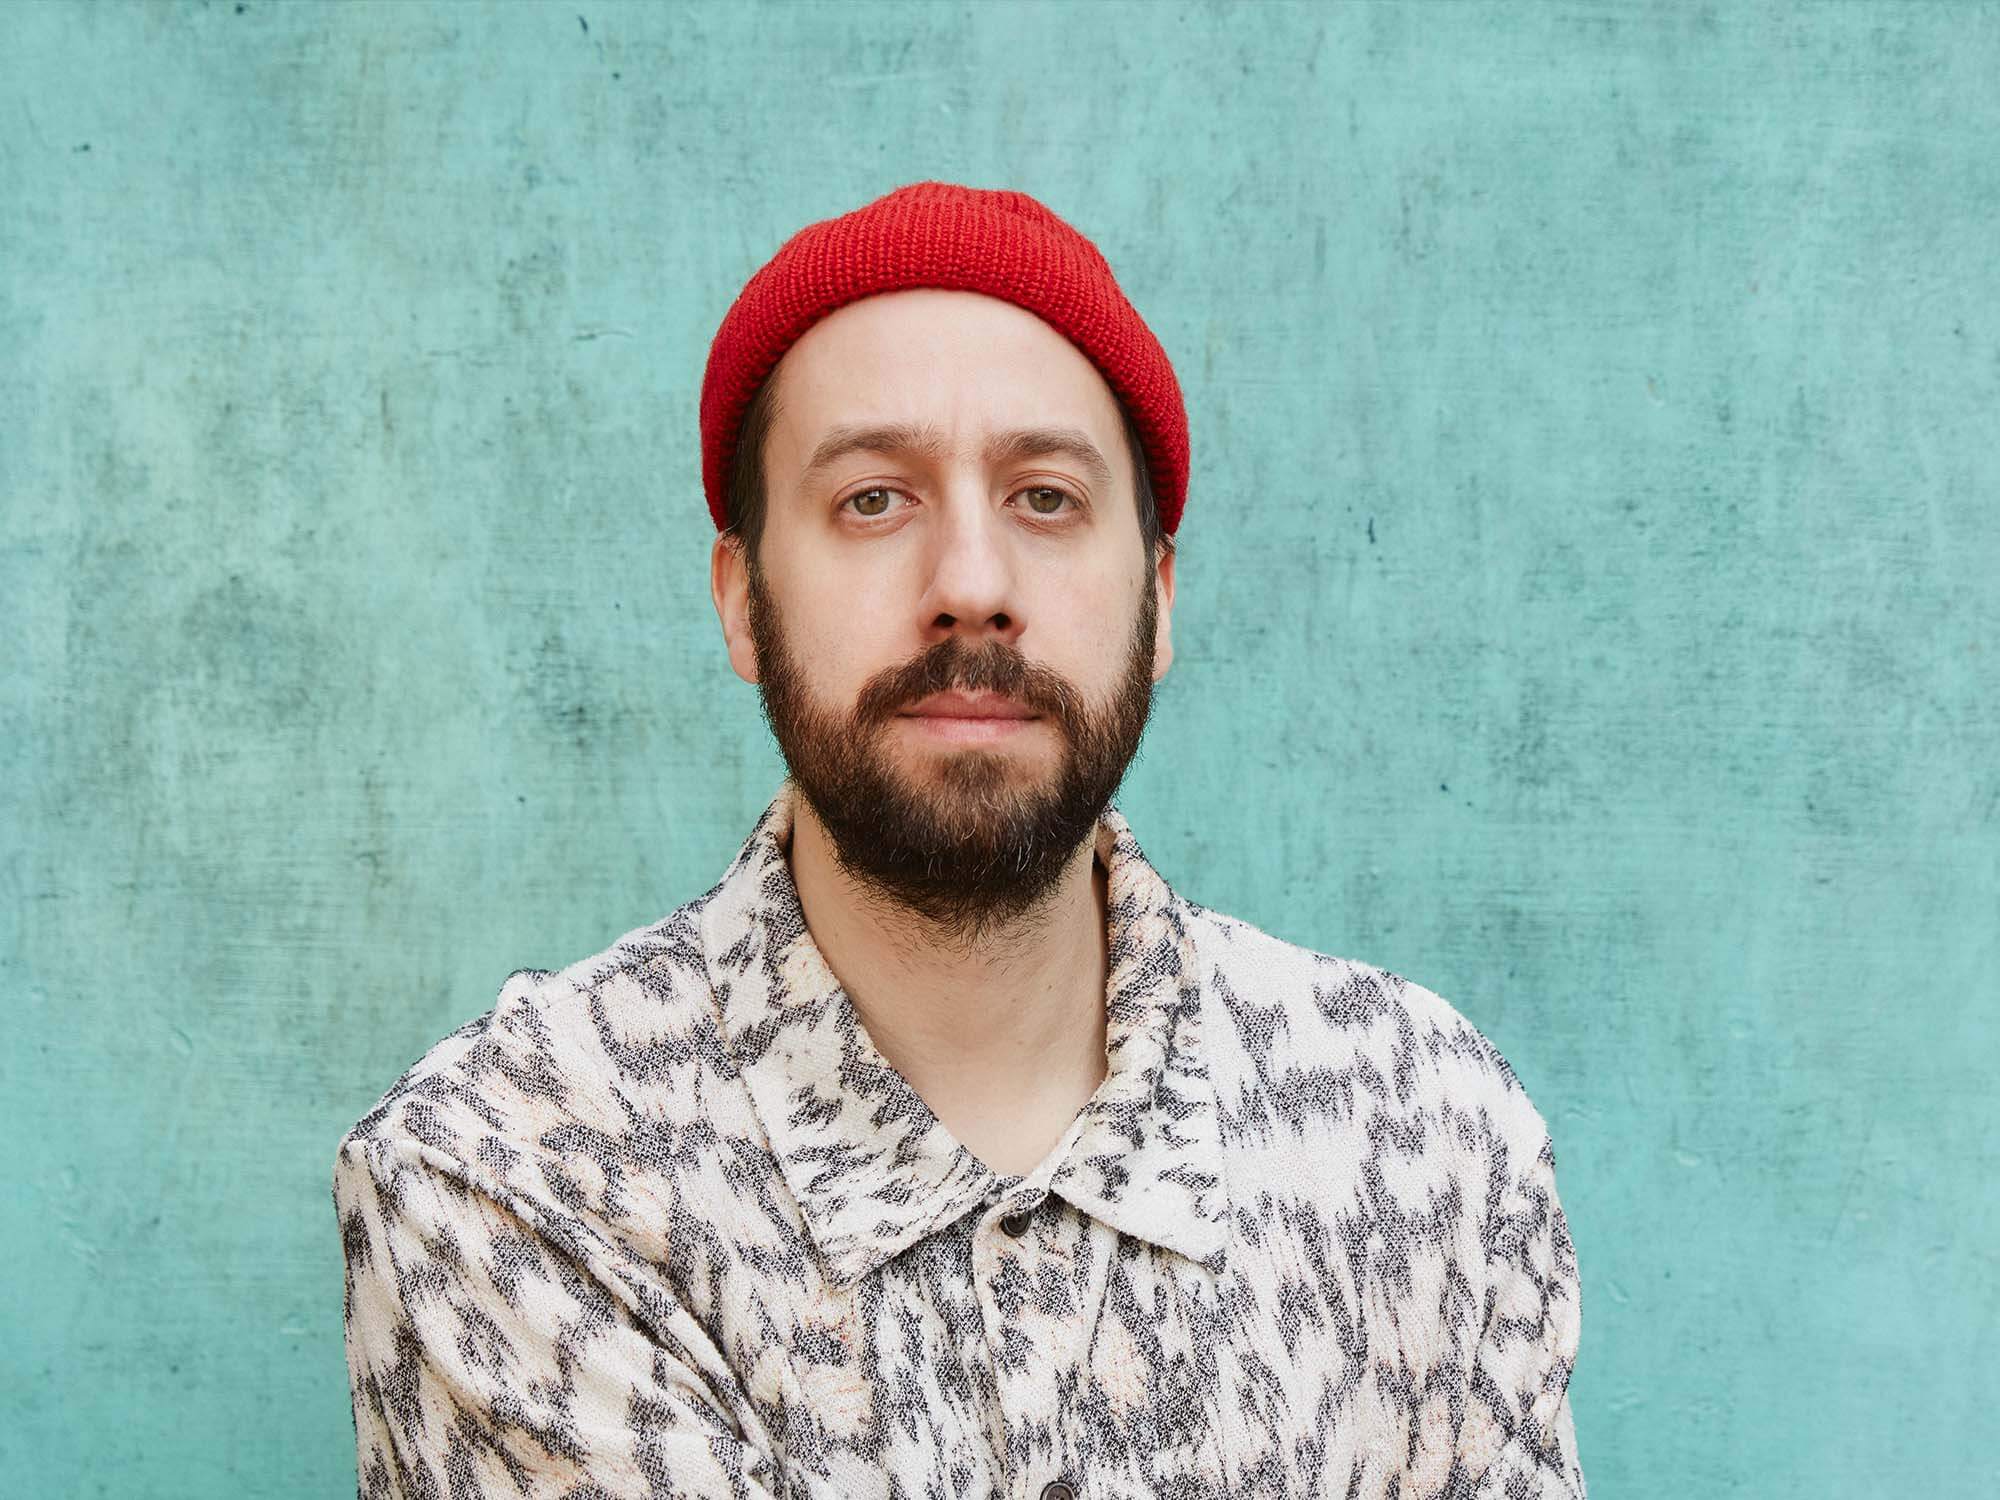 Gold Panda wearing red hat with blue background